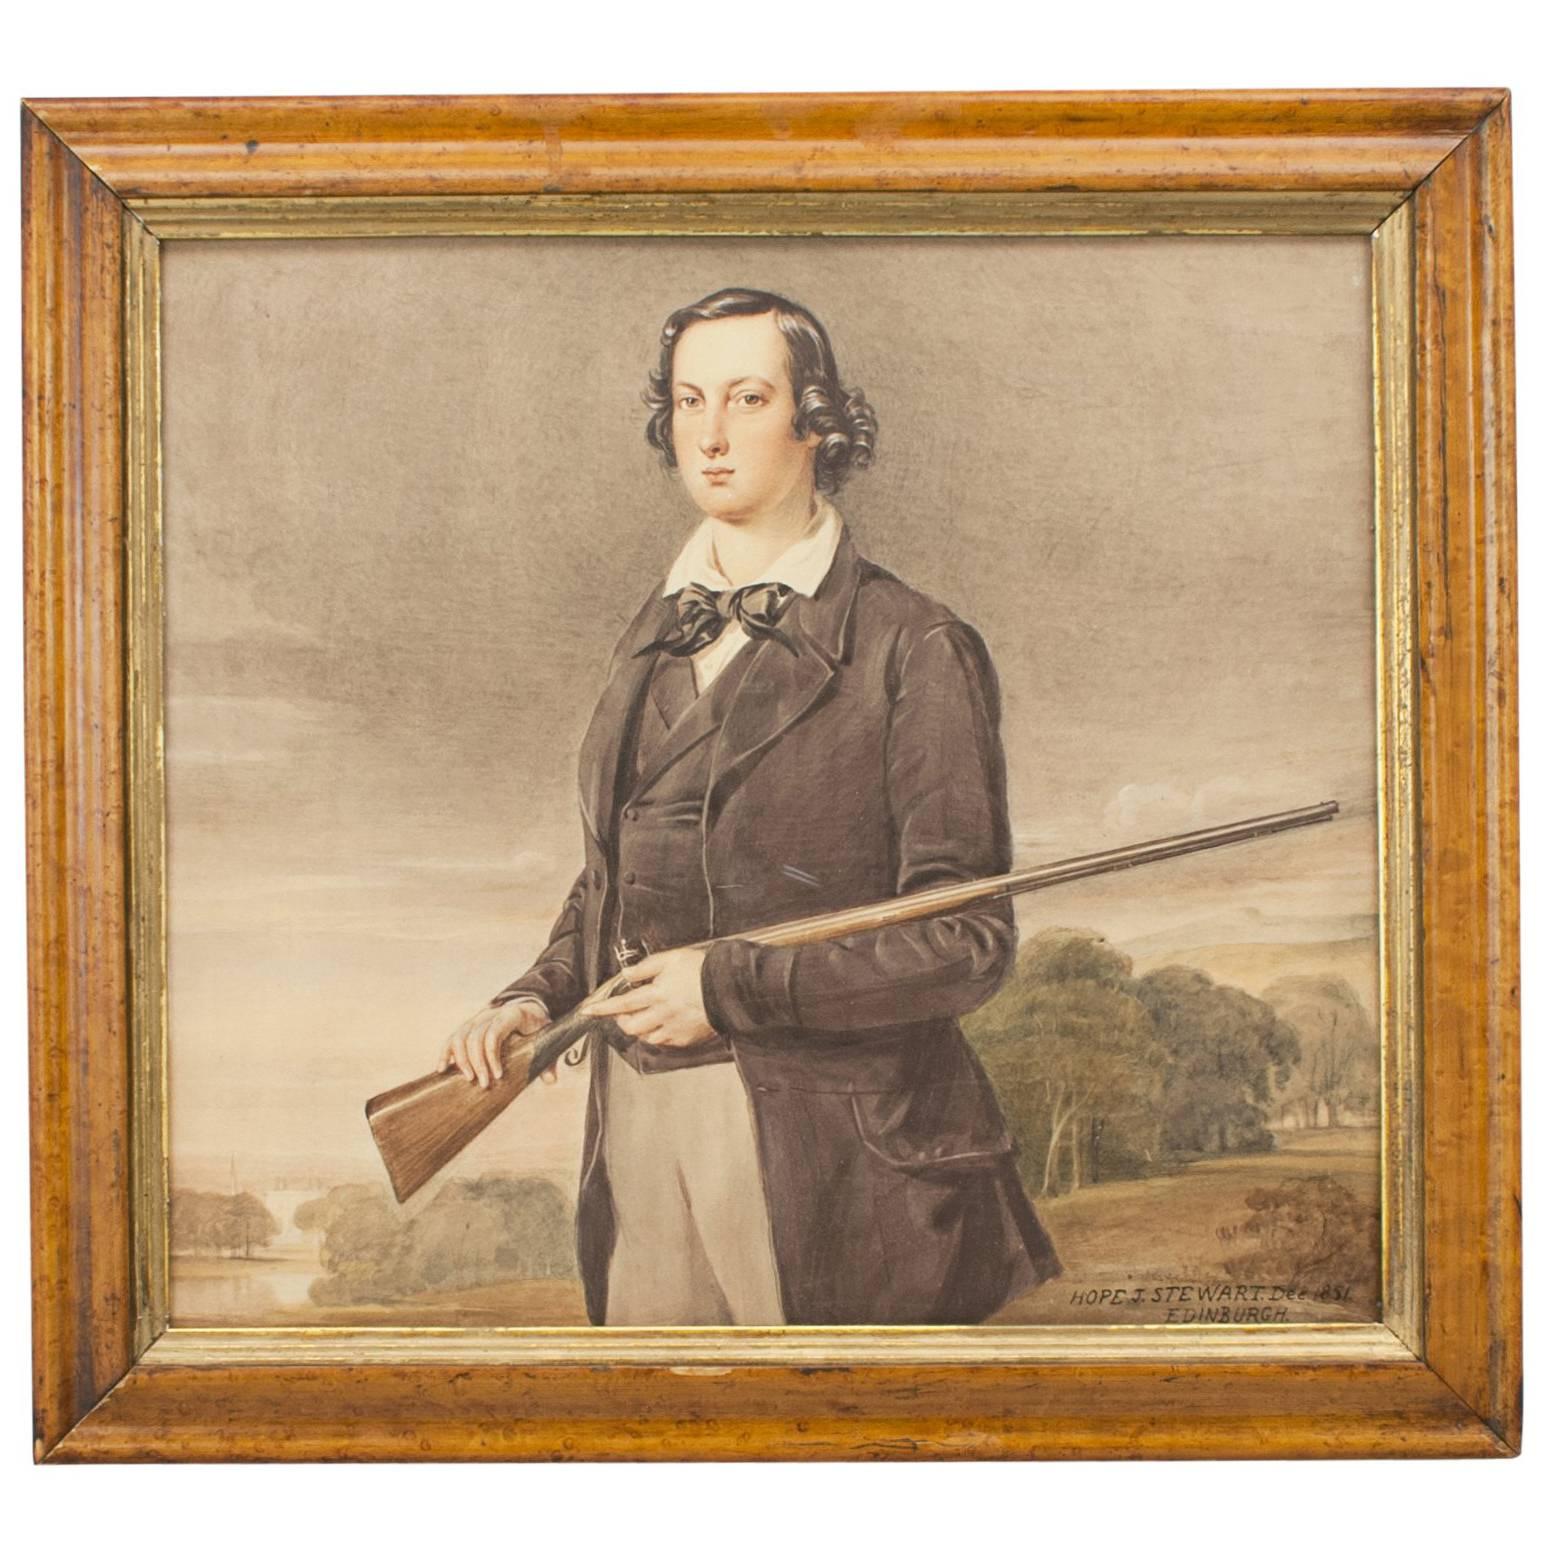 Portrait of a Young Man with Gun